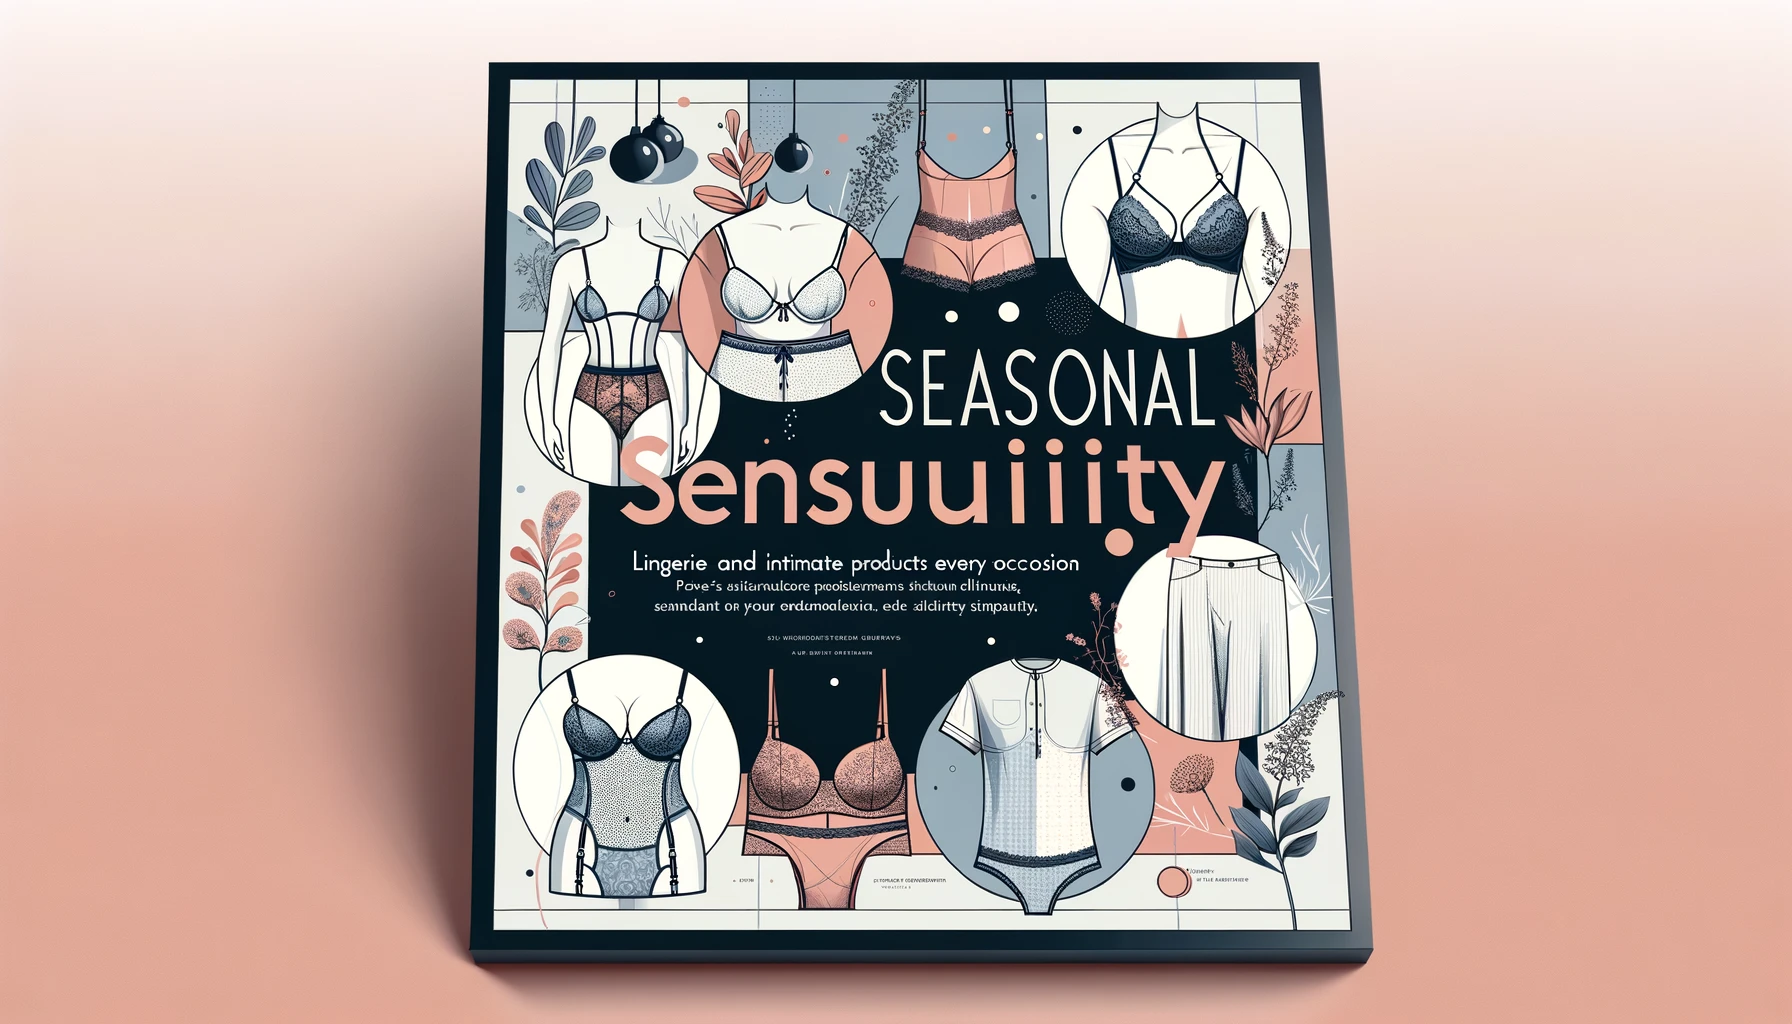 Seasonal Sensuality: Lingerie and Intimate Products for Every Occasion-SexBodyShop